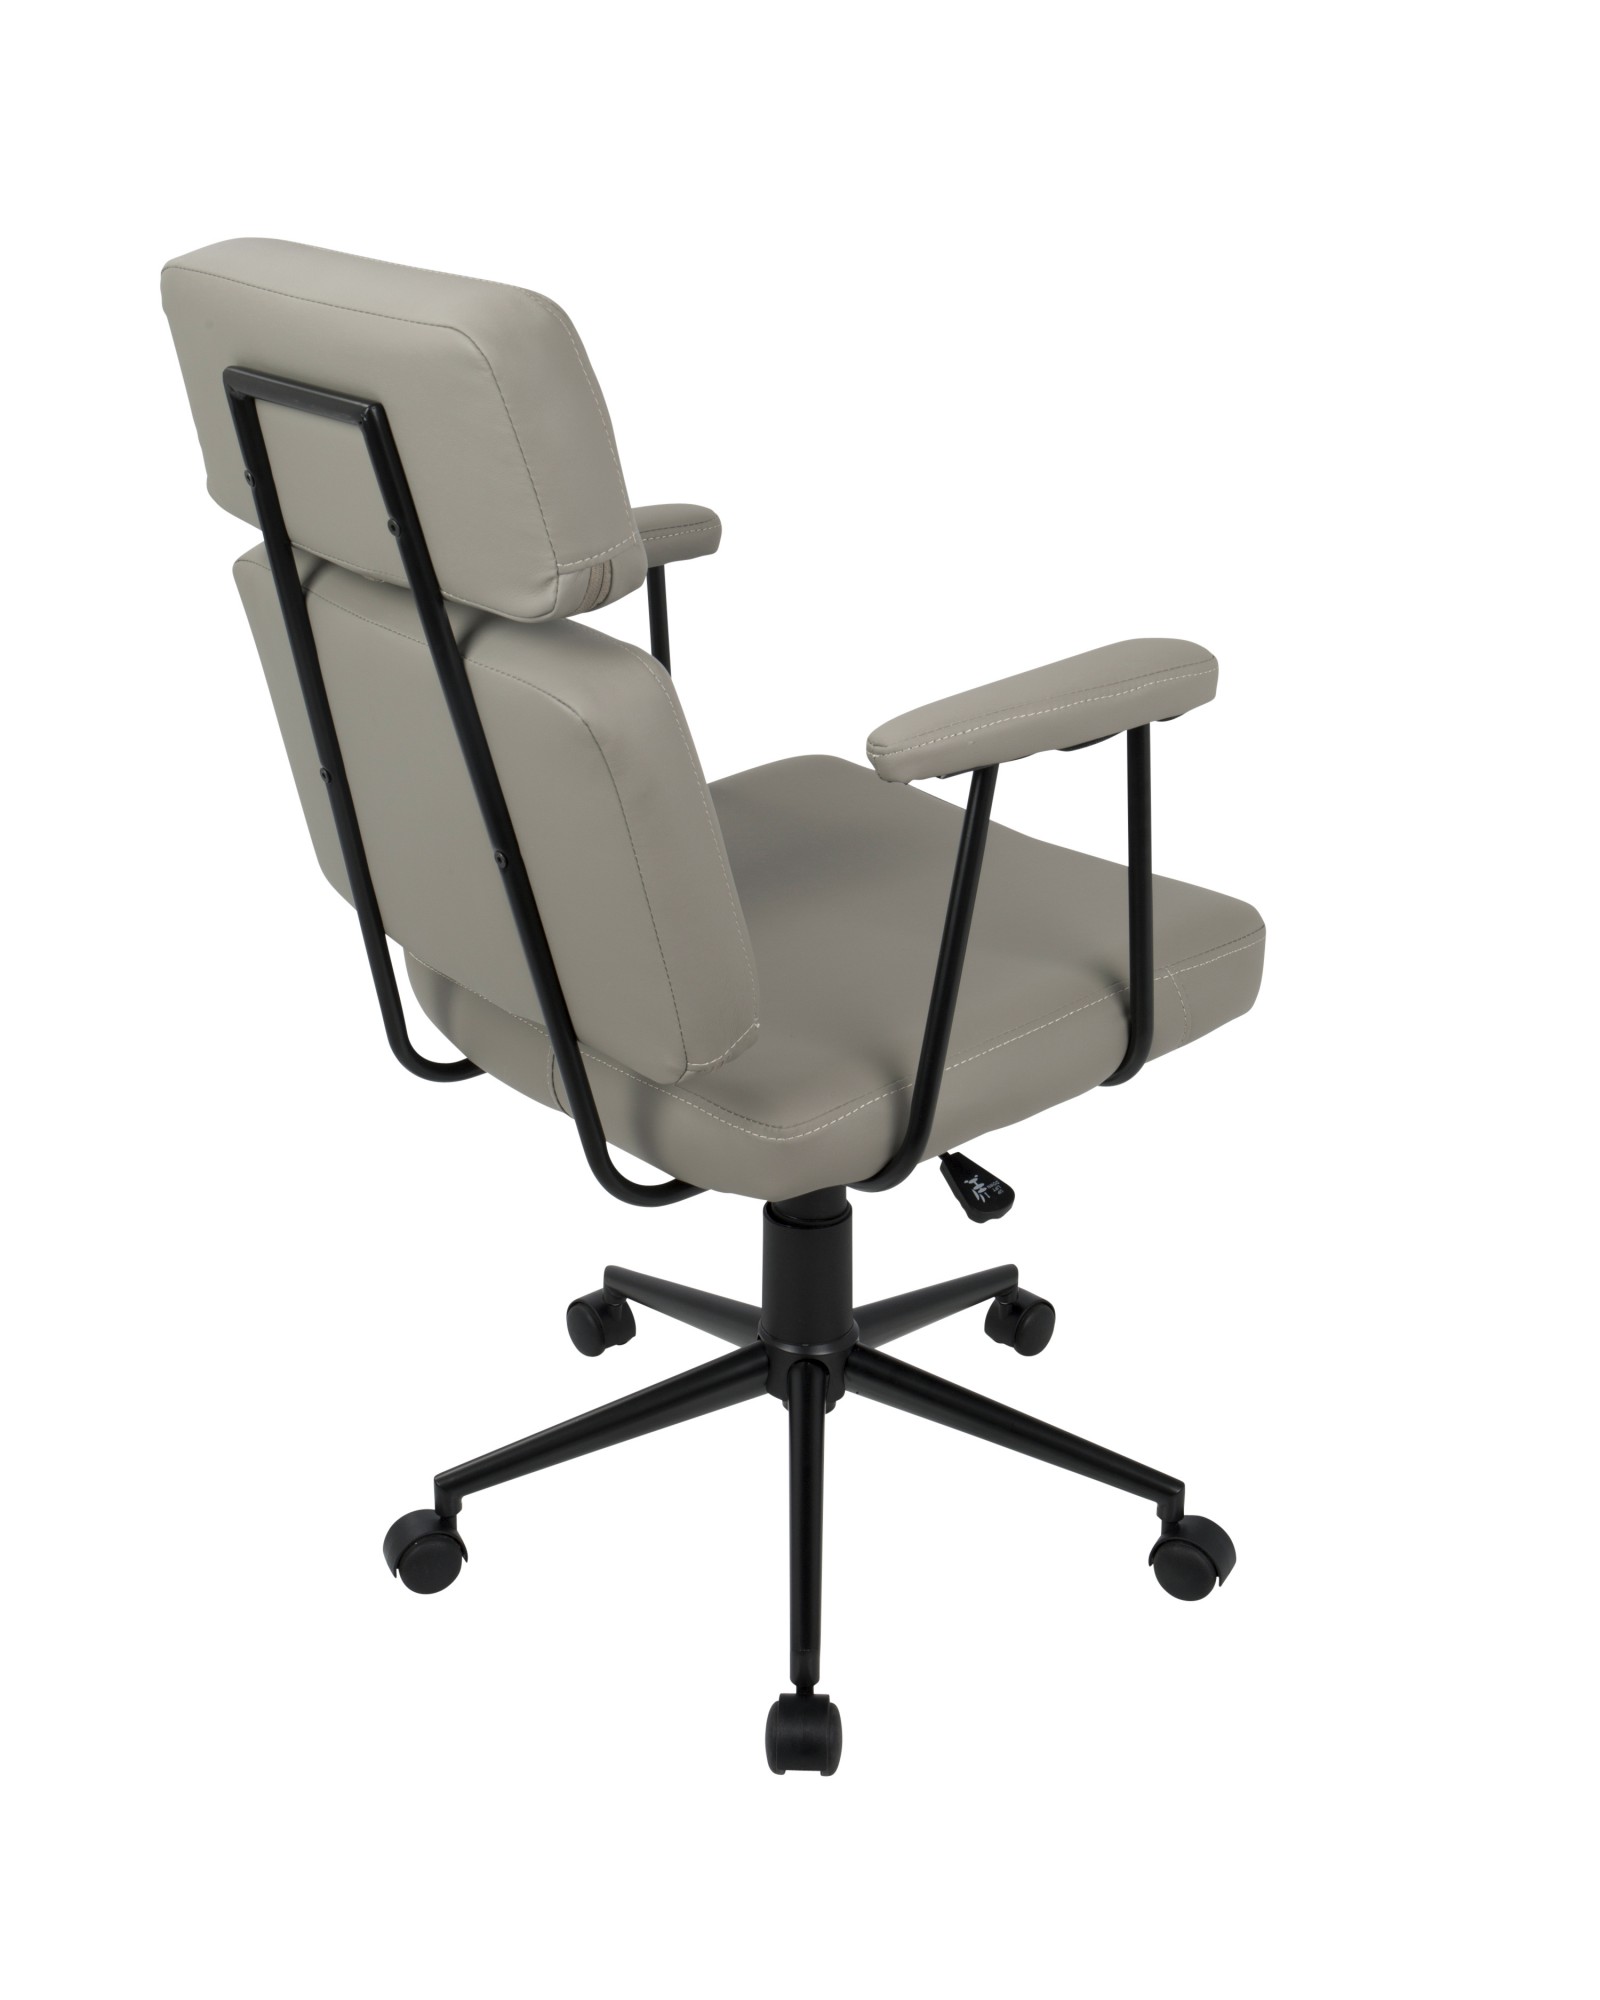 Sigmund Contemporary Adjustable Office Chair in Grey Faux Leather